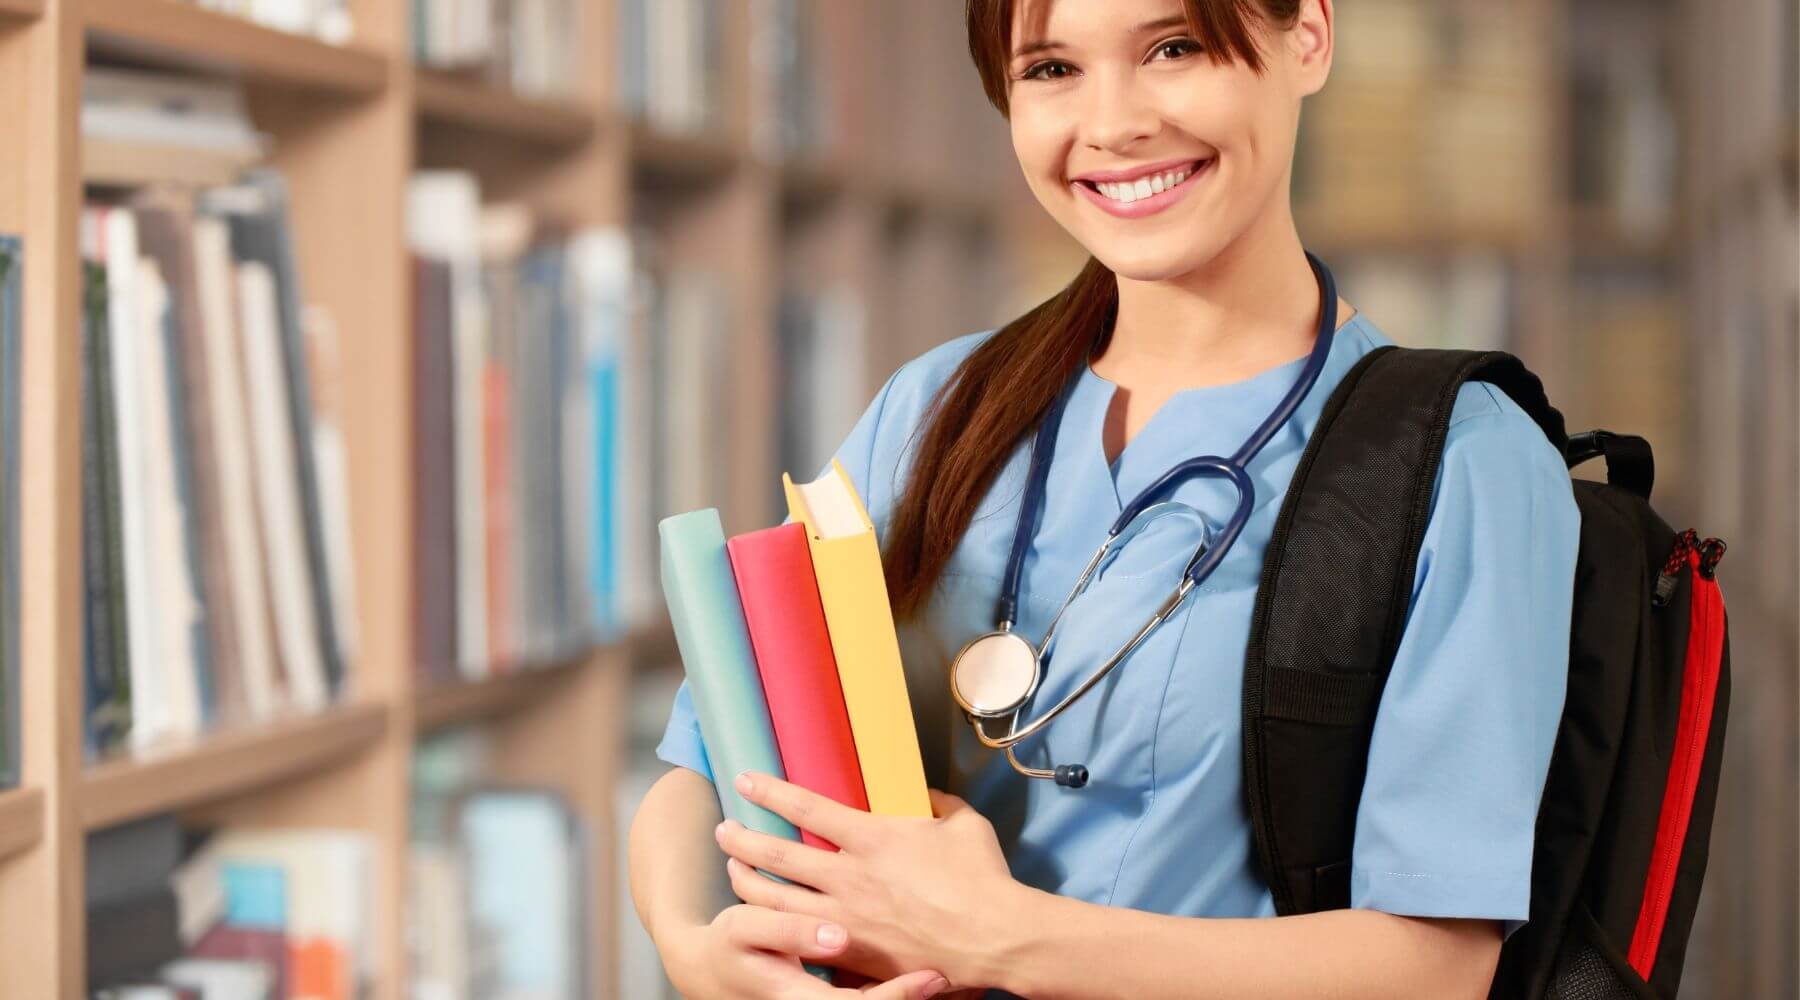 Nurse smiling with backpack and books.